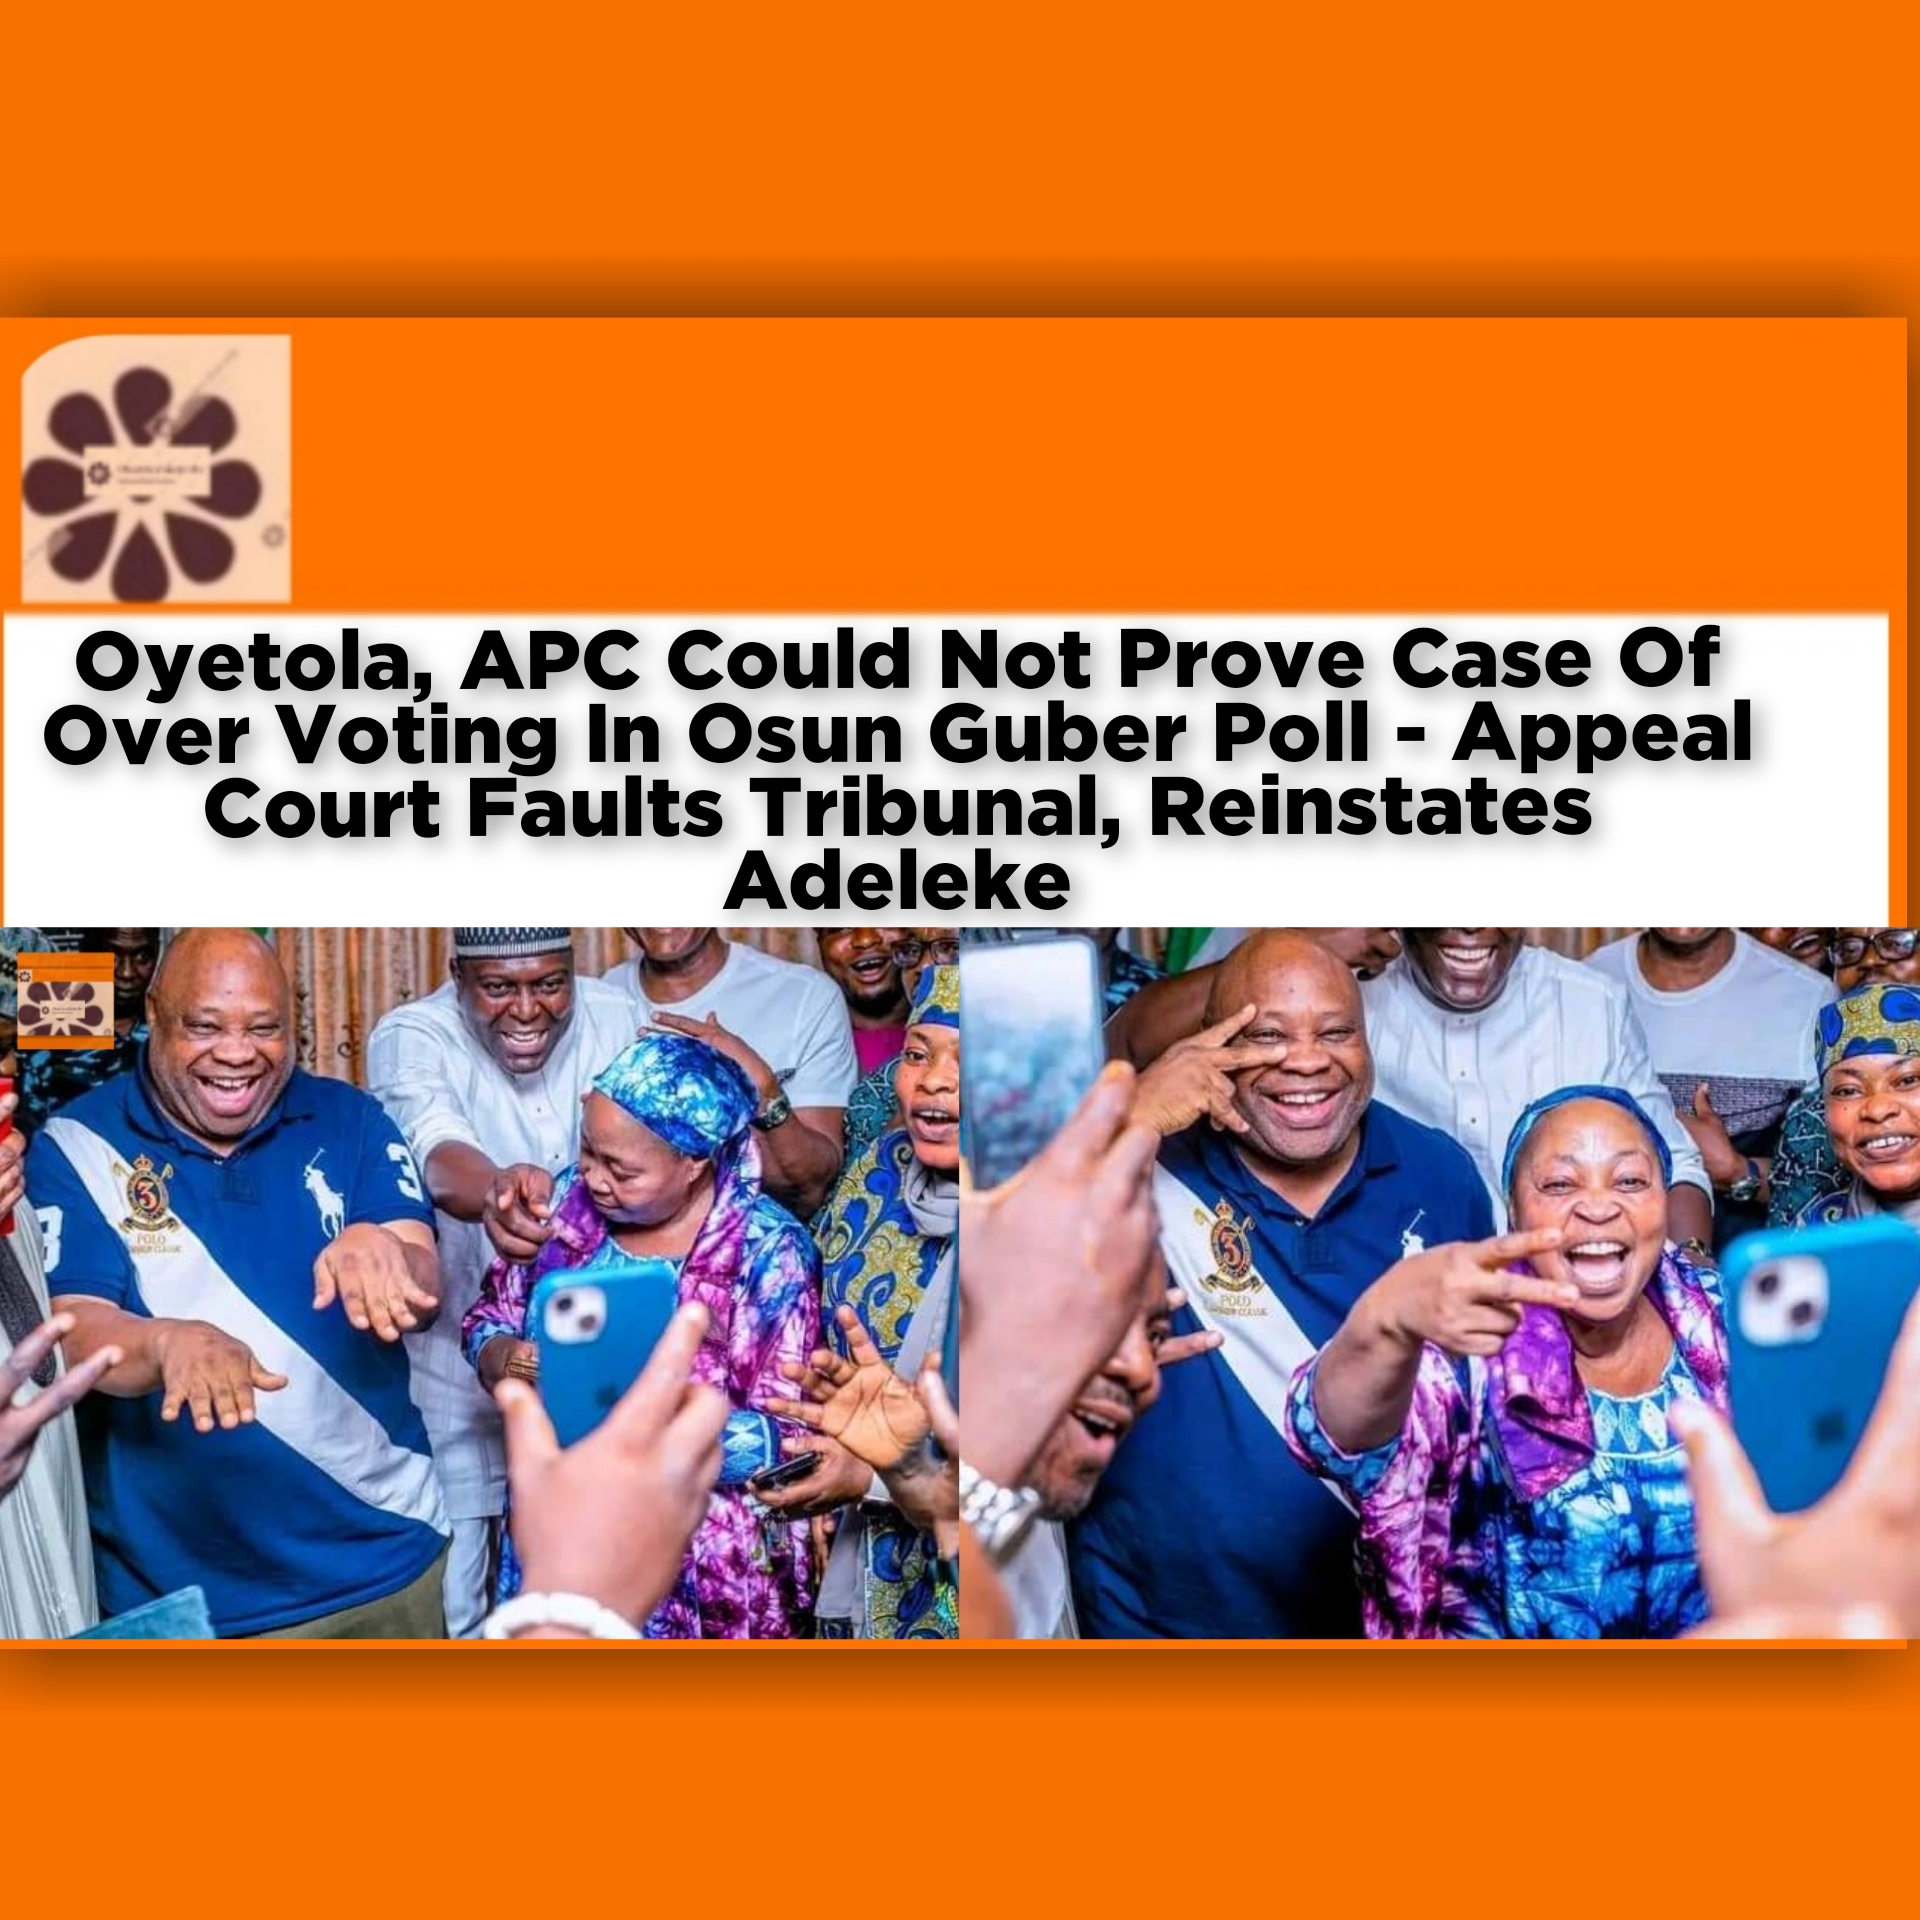 Oyetola, APC Could Not Prove Case Of Over Voting In Osun Guber Poll - Appeal Court Faults Tribunal, Reinstates Adeleke ~ OsazuwaAkonedo #Borno